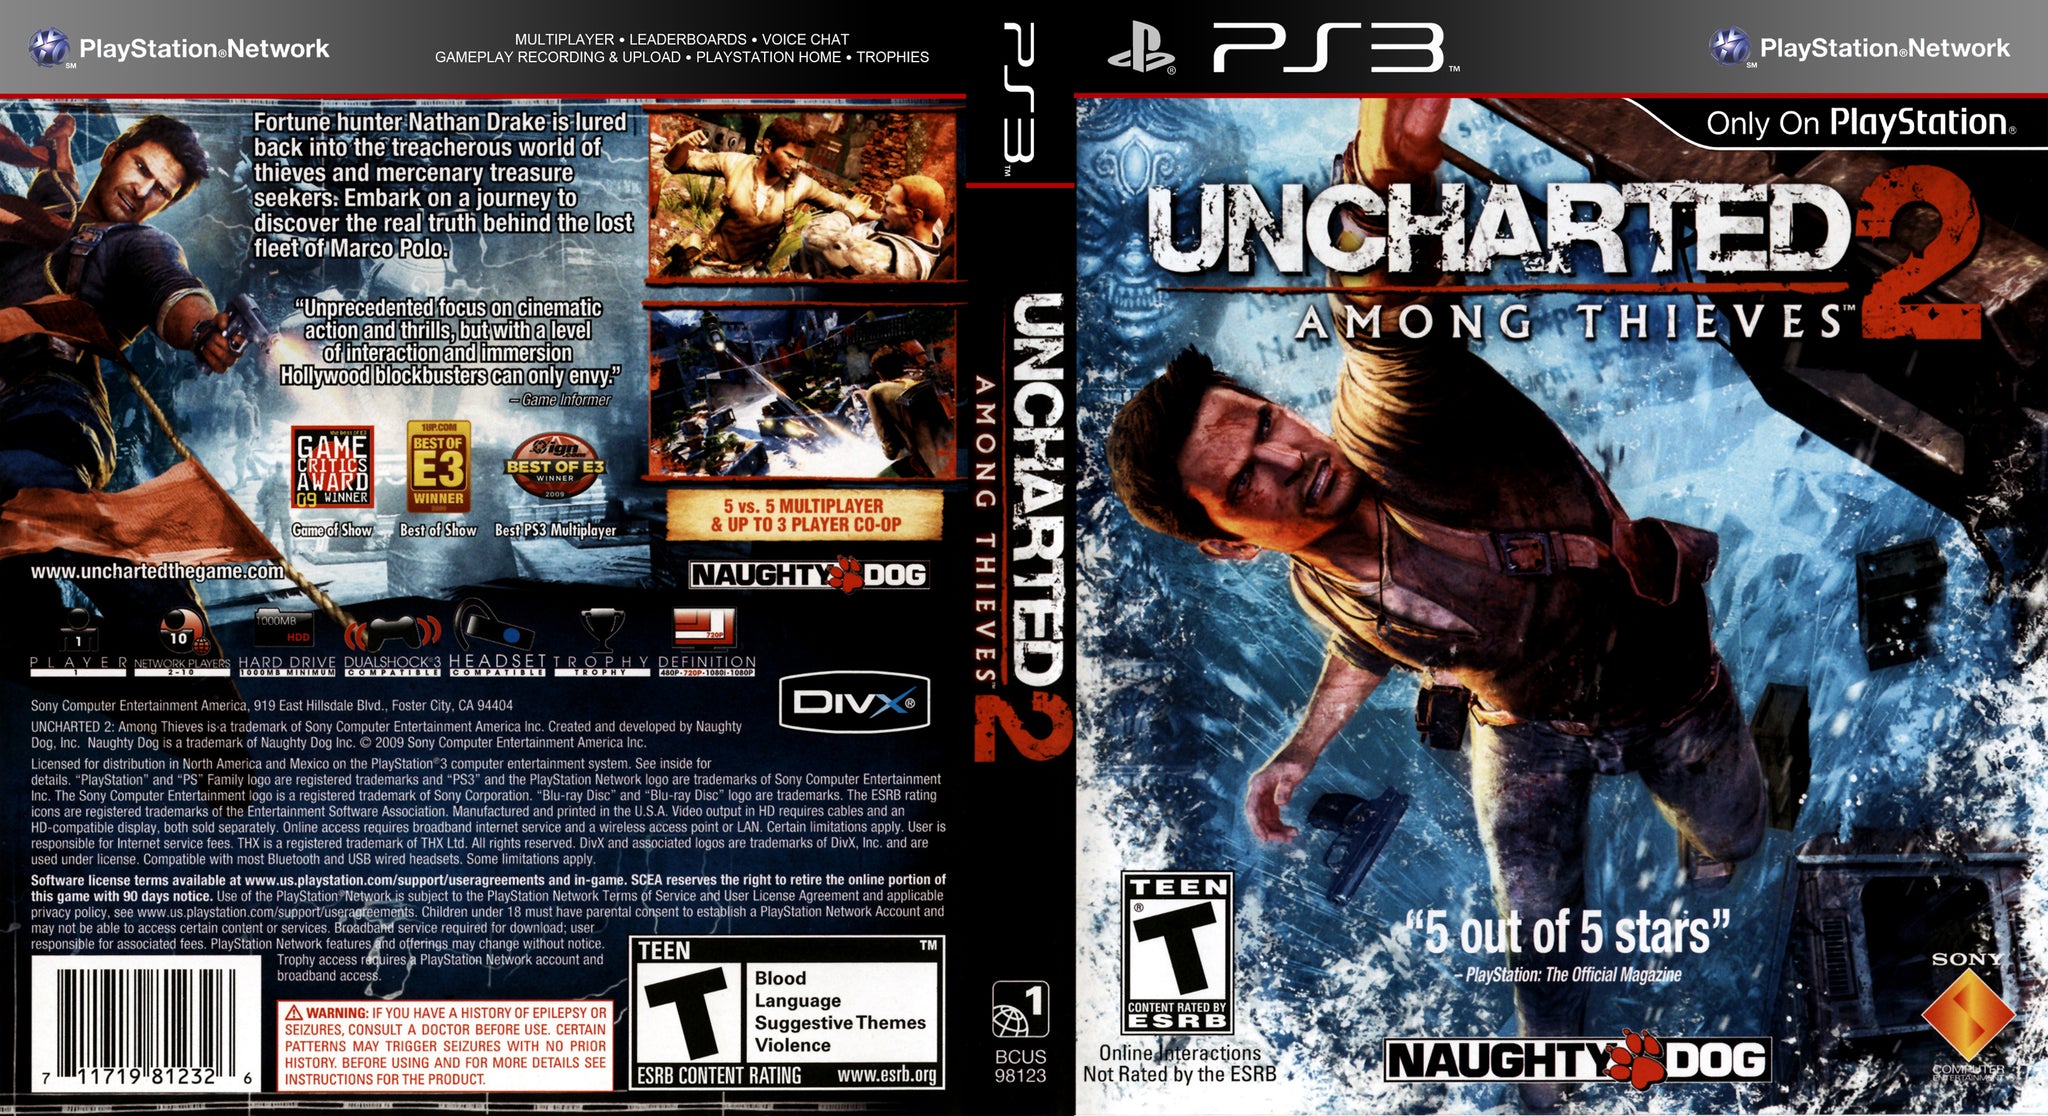 Combo Uncharted 3 + God of war ascension ps3 - MSQ Games